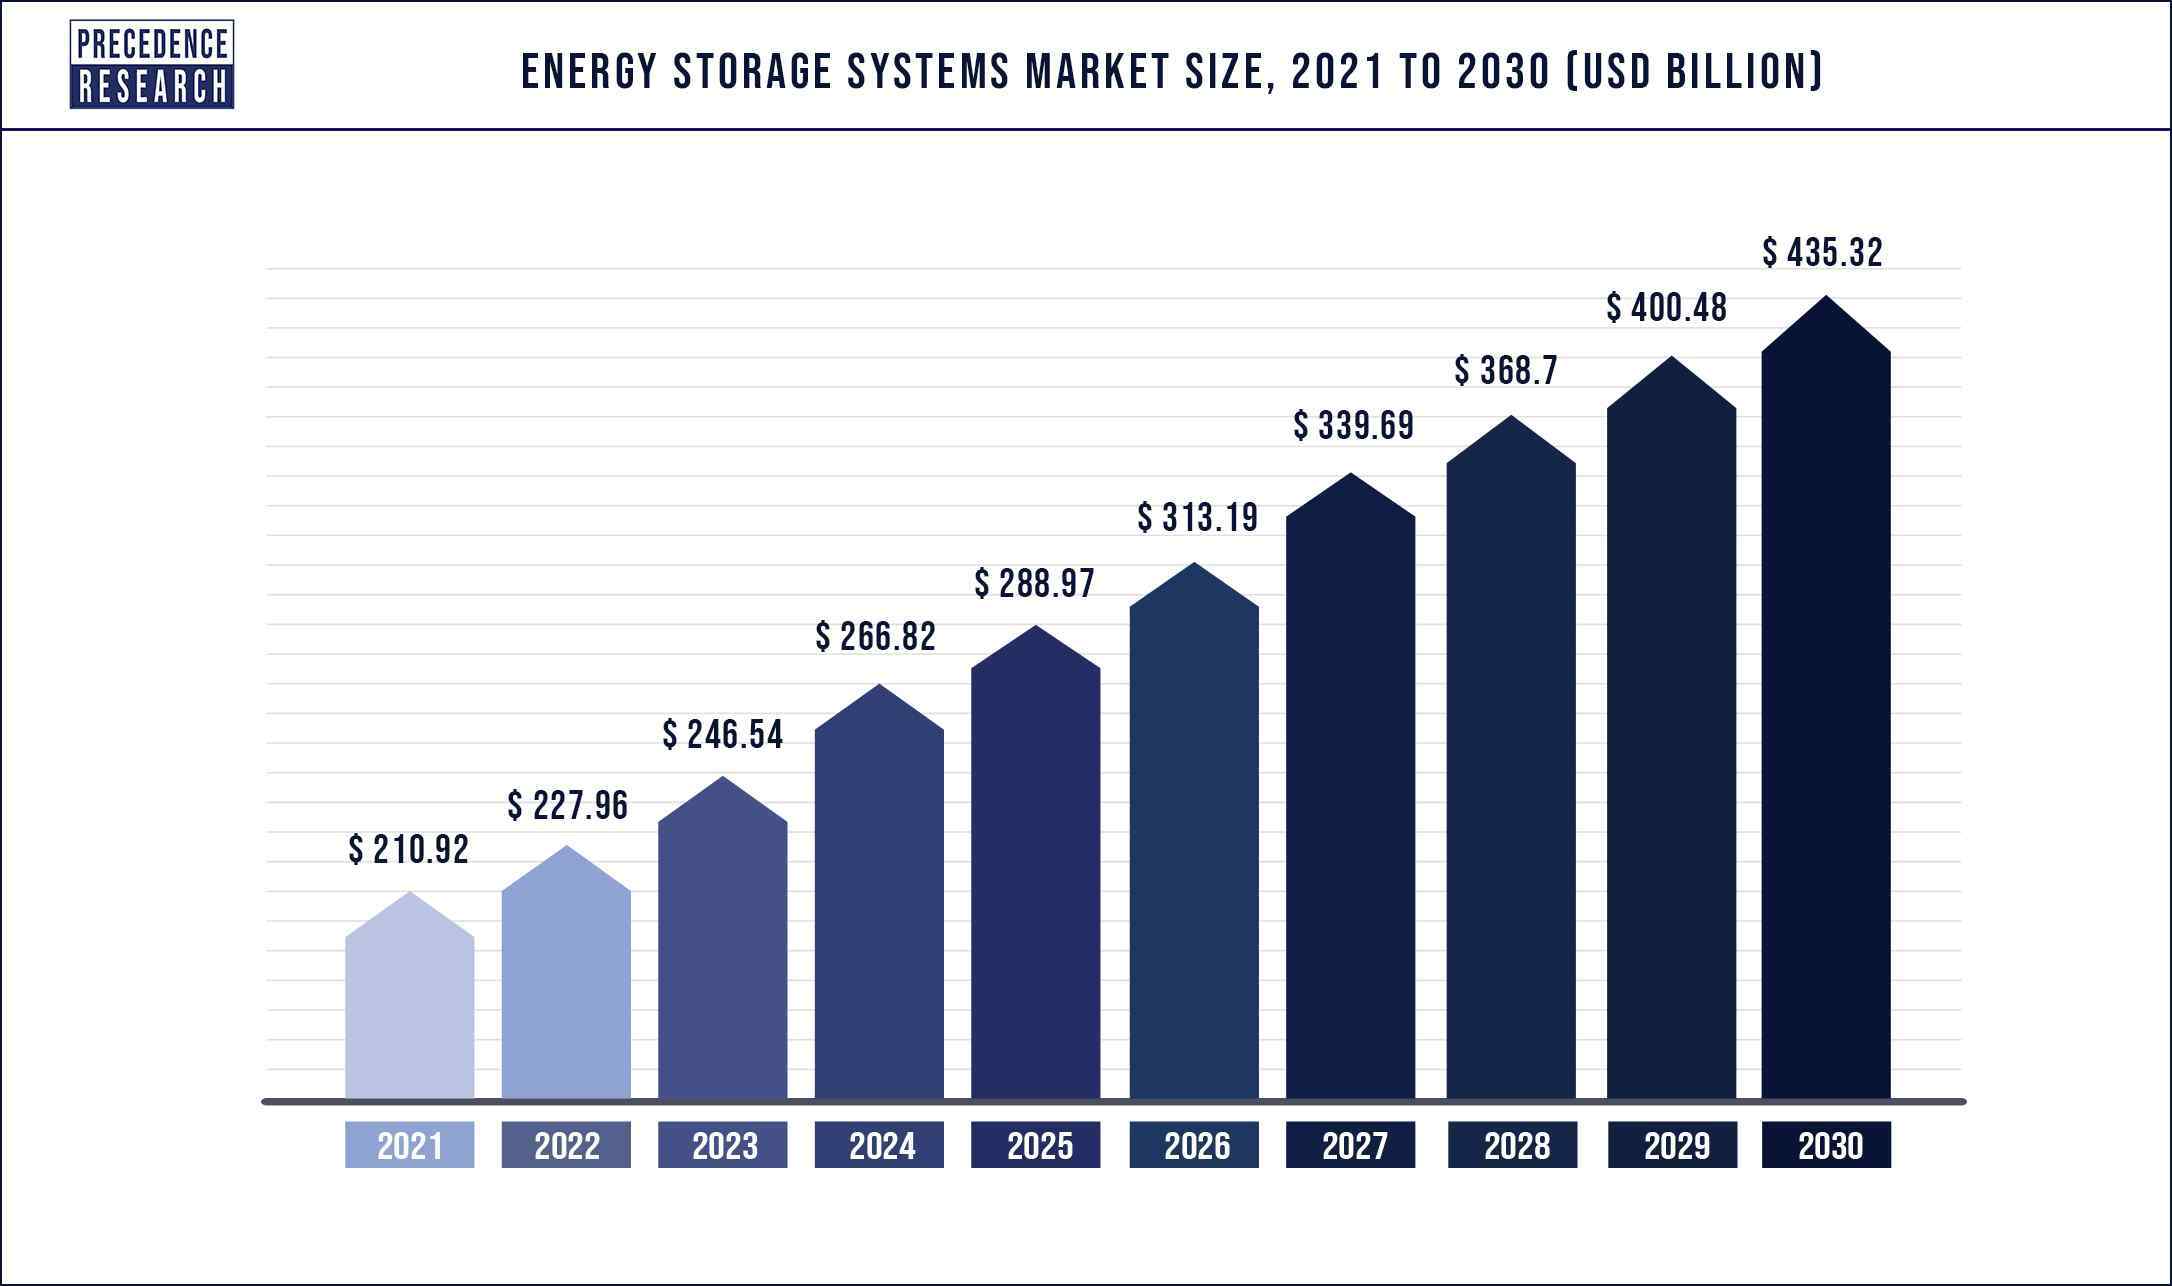 Energy Storage Systems Market Size 2022 to 2030